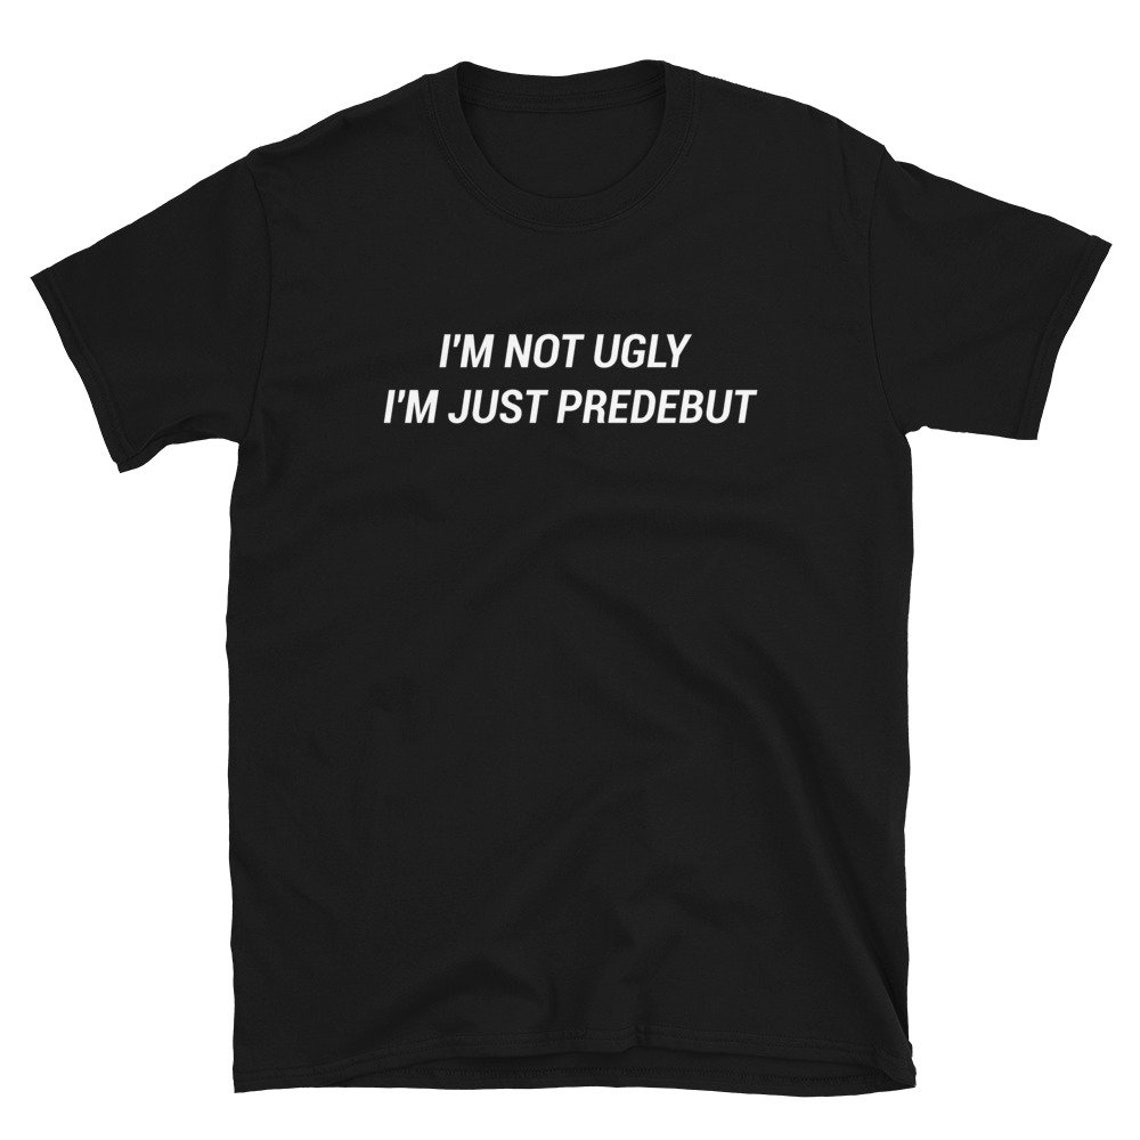 I'm not ugly I'm just predebut funny kpop shirt bts | Etsy